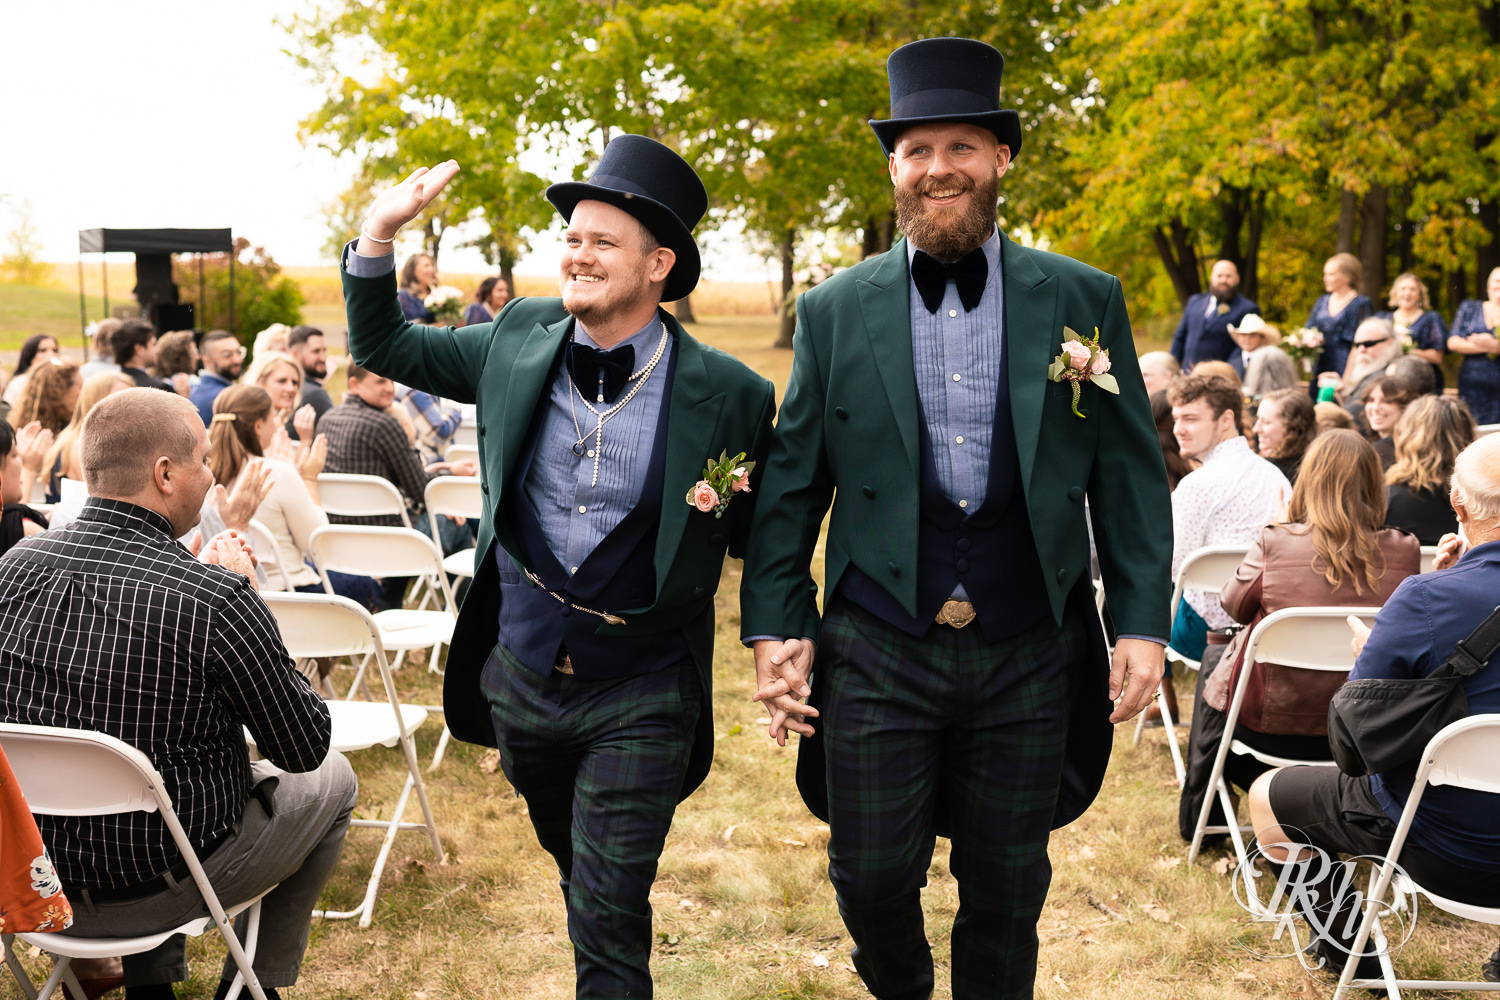 Grooms smiling and waving walking down the aisle on wedding day in Belle Plaine, Minnesota.